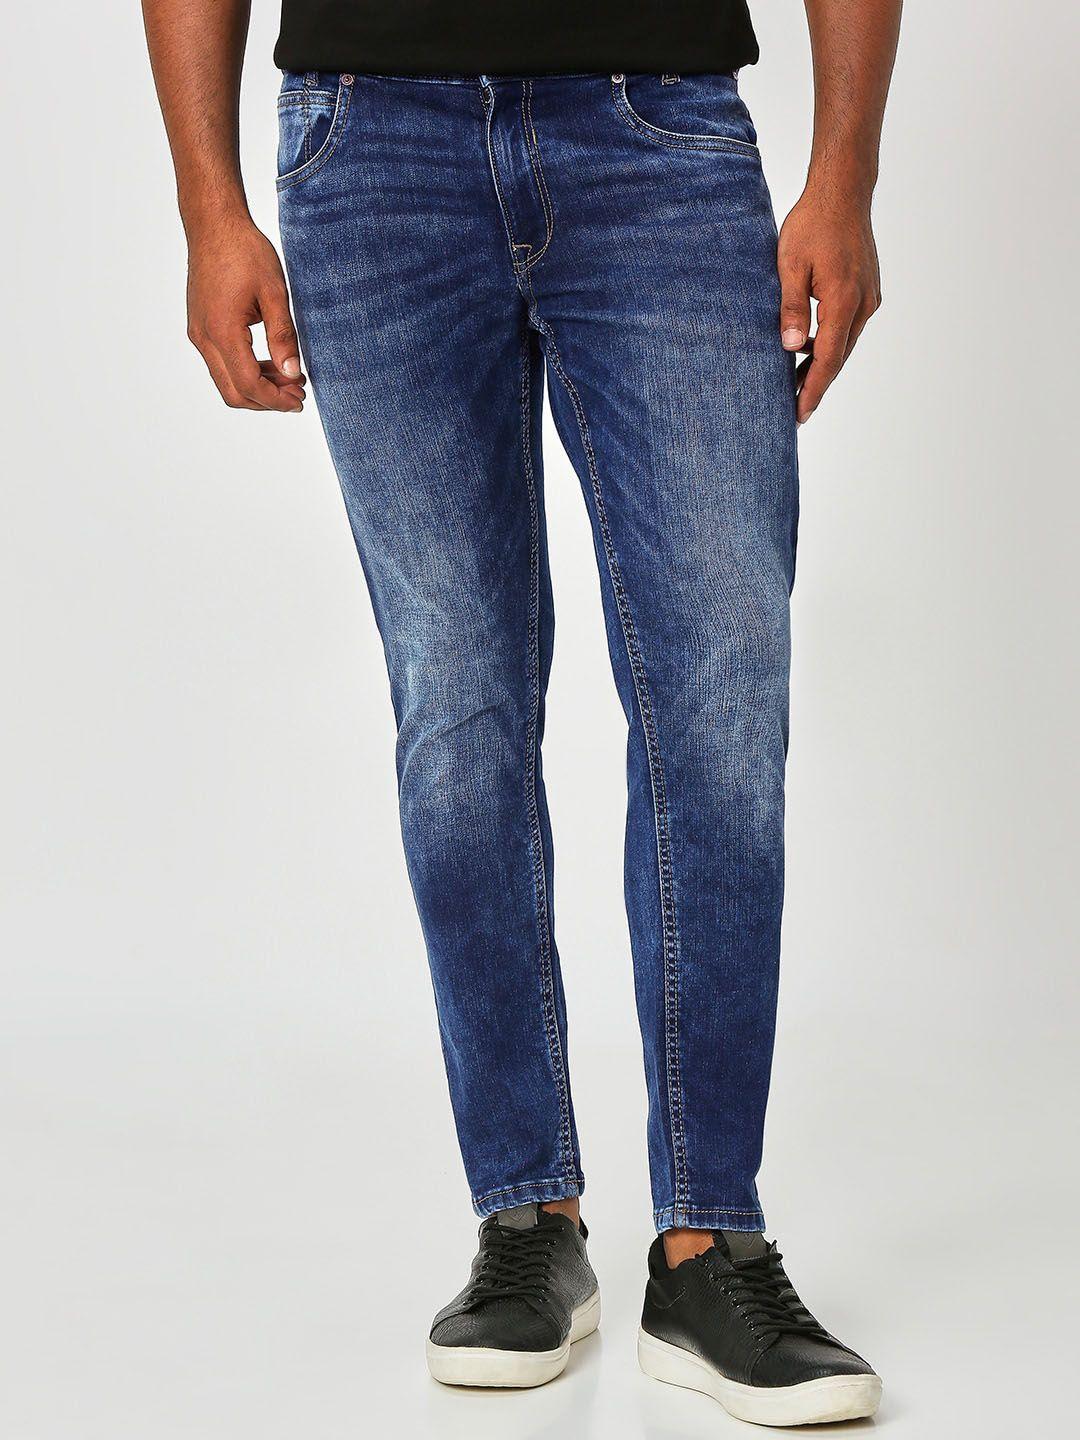 mufti-men-tapered-fit-mildly-distressed-heavy-fade-stretchable-jeans